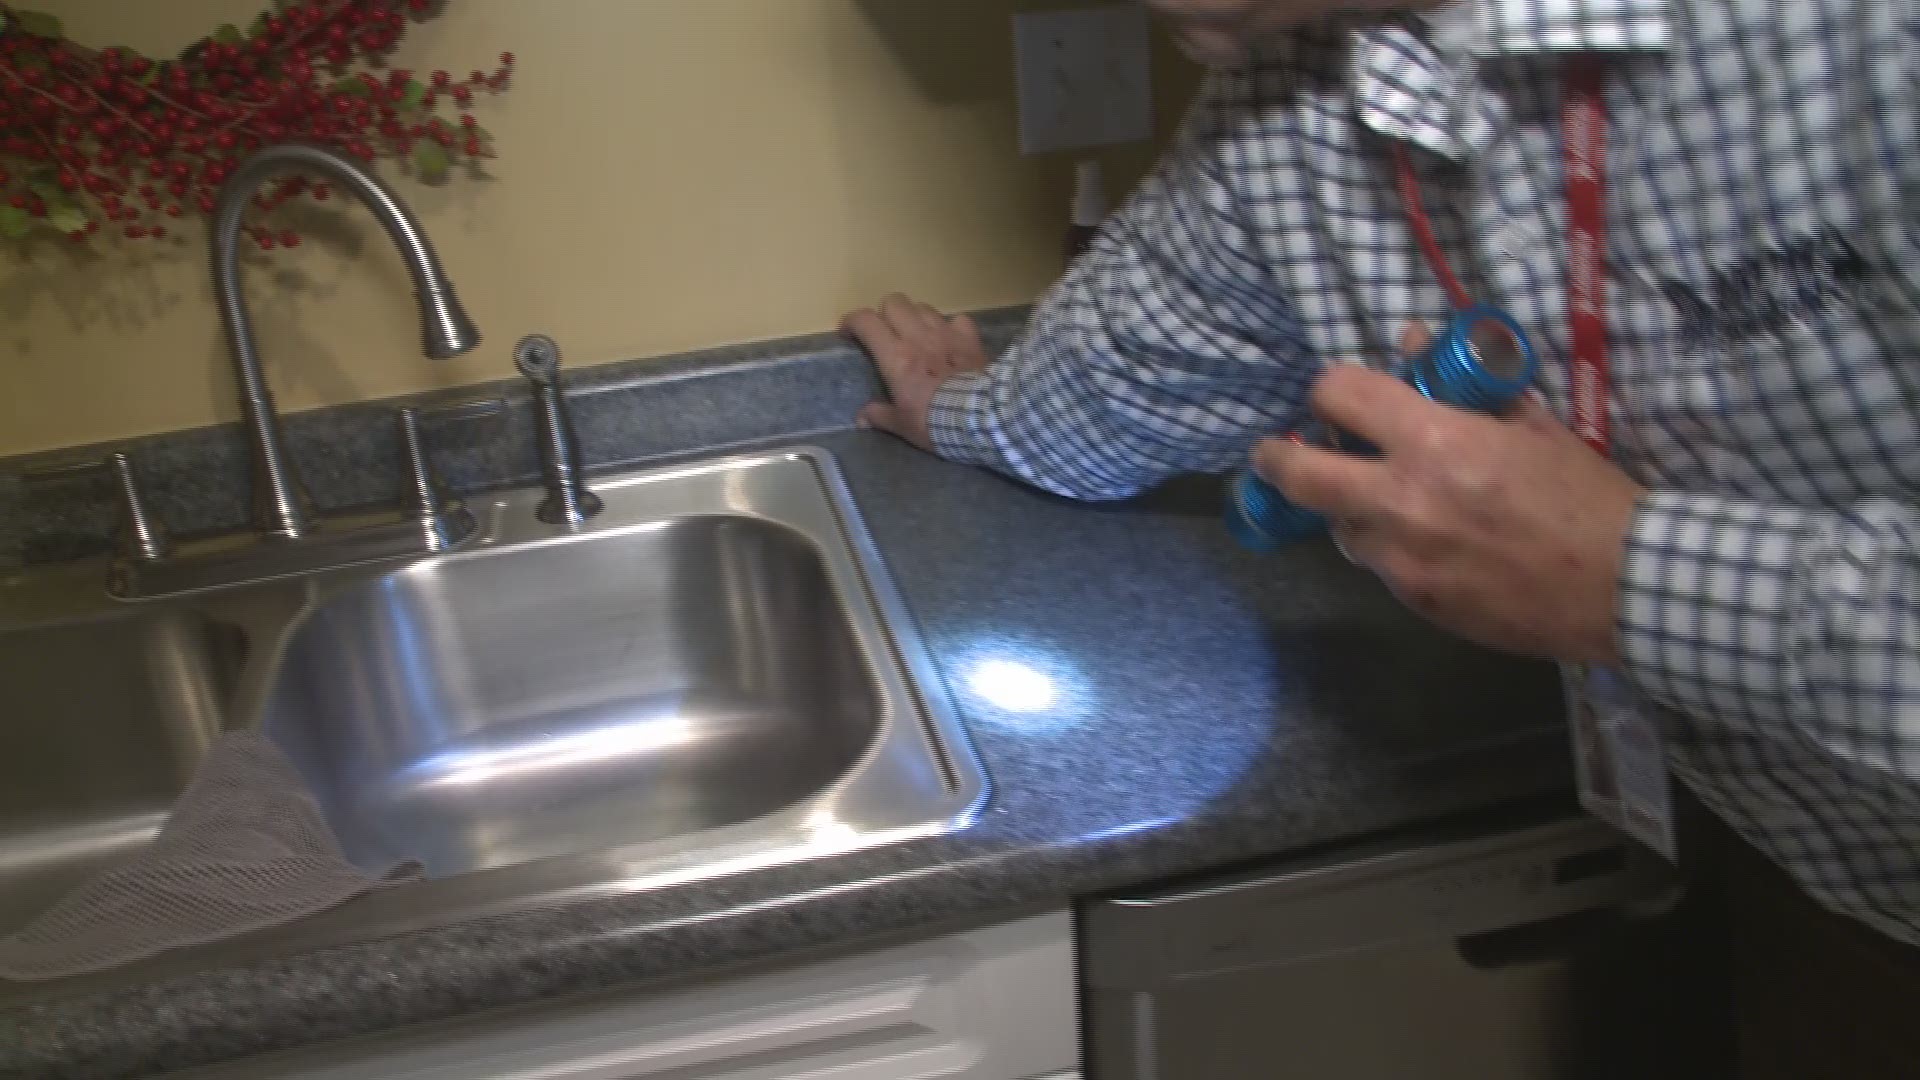 Robert Lane says you don't want to leave any spot in your kitchen without the proper seal.